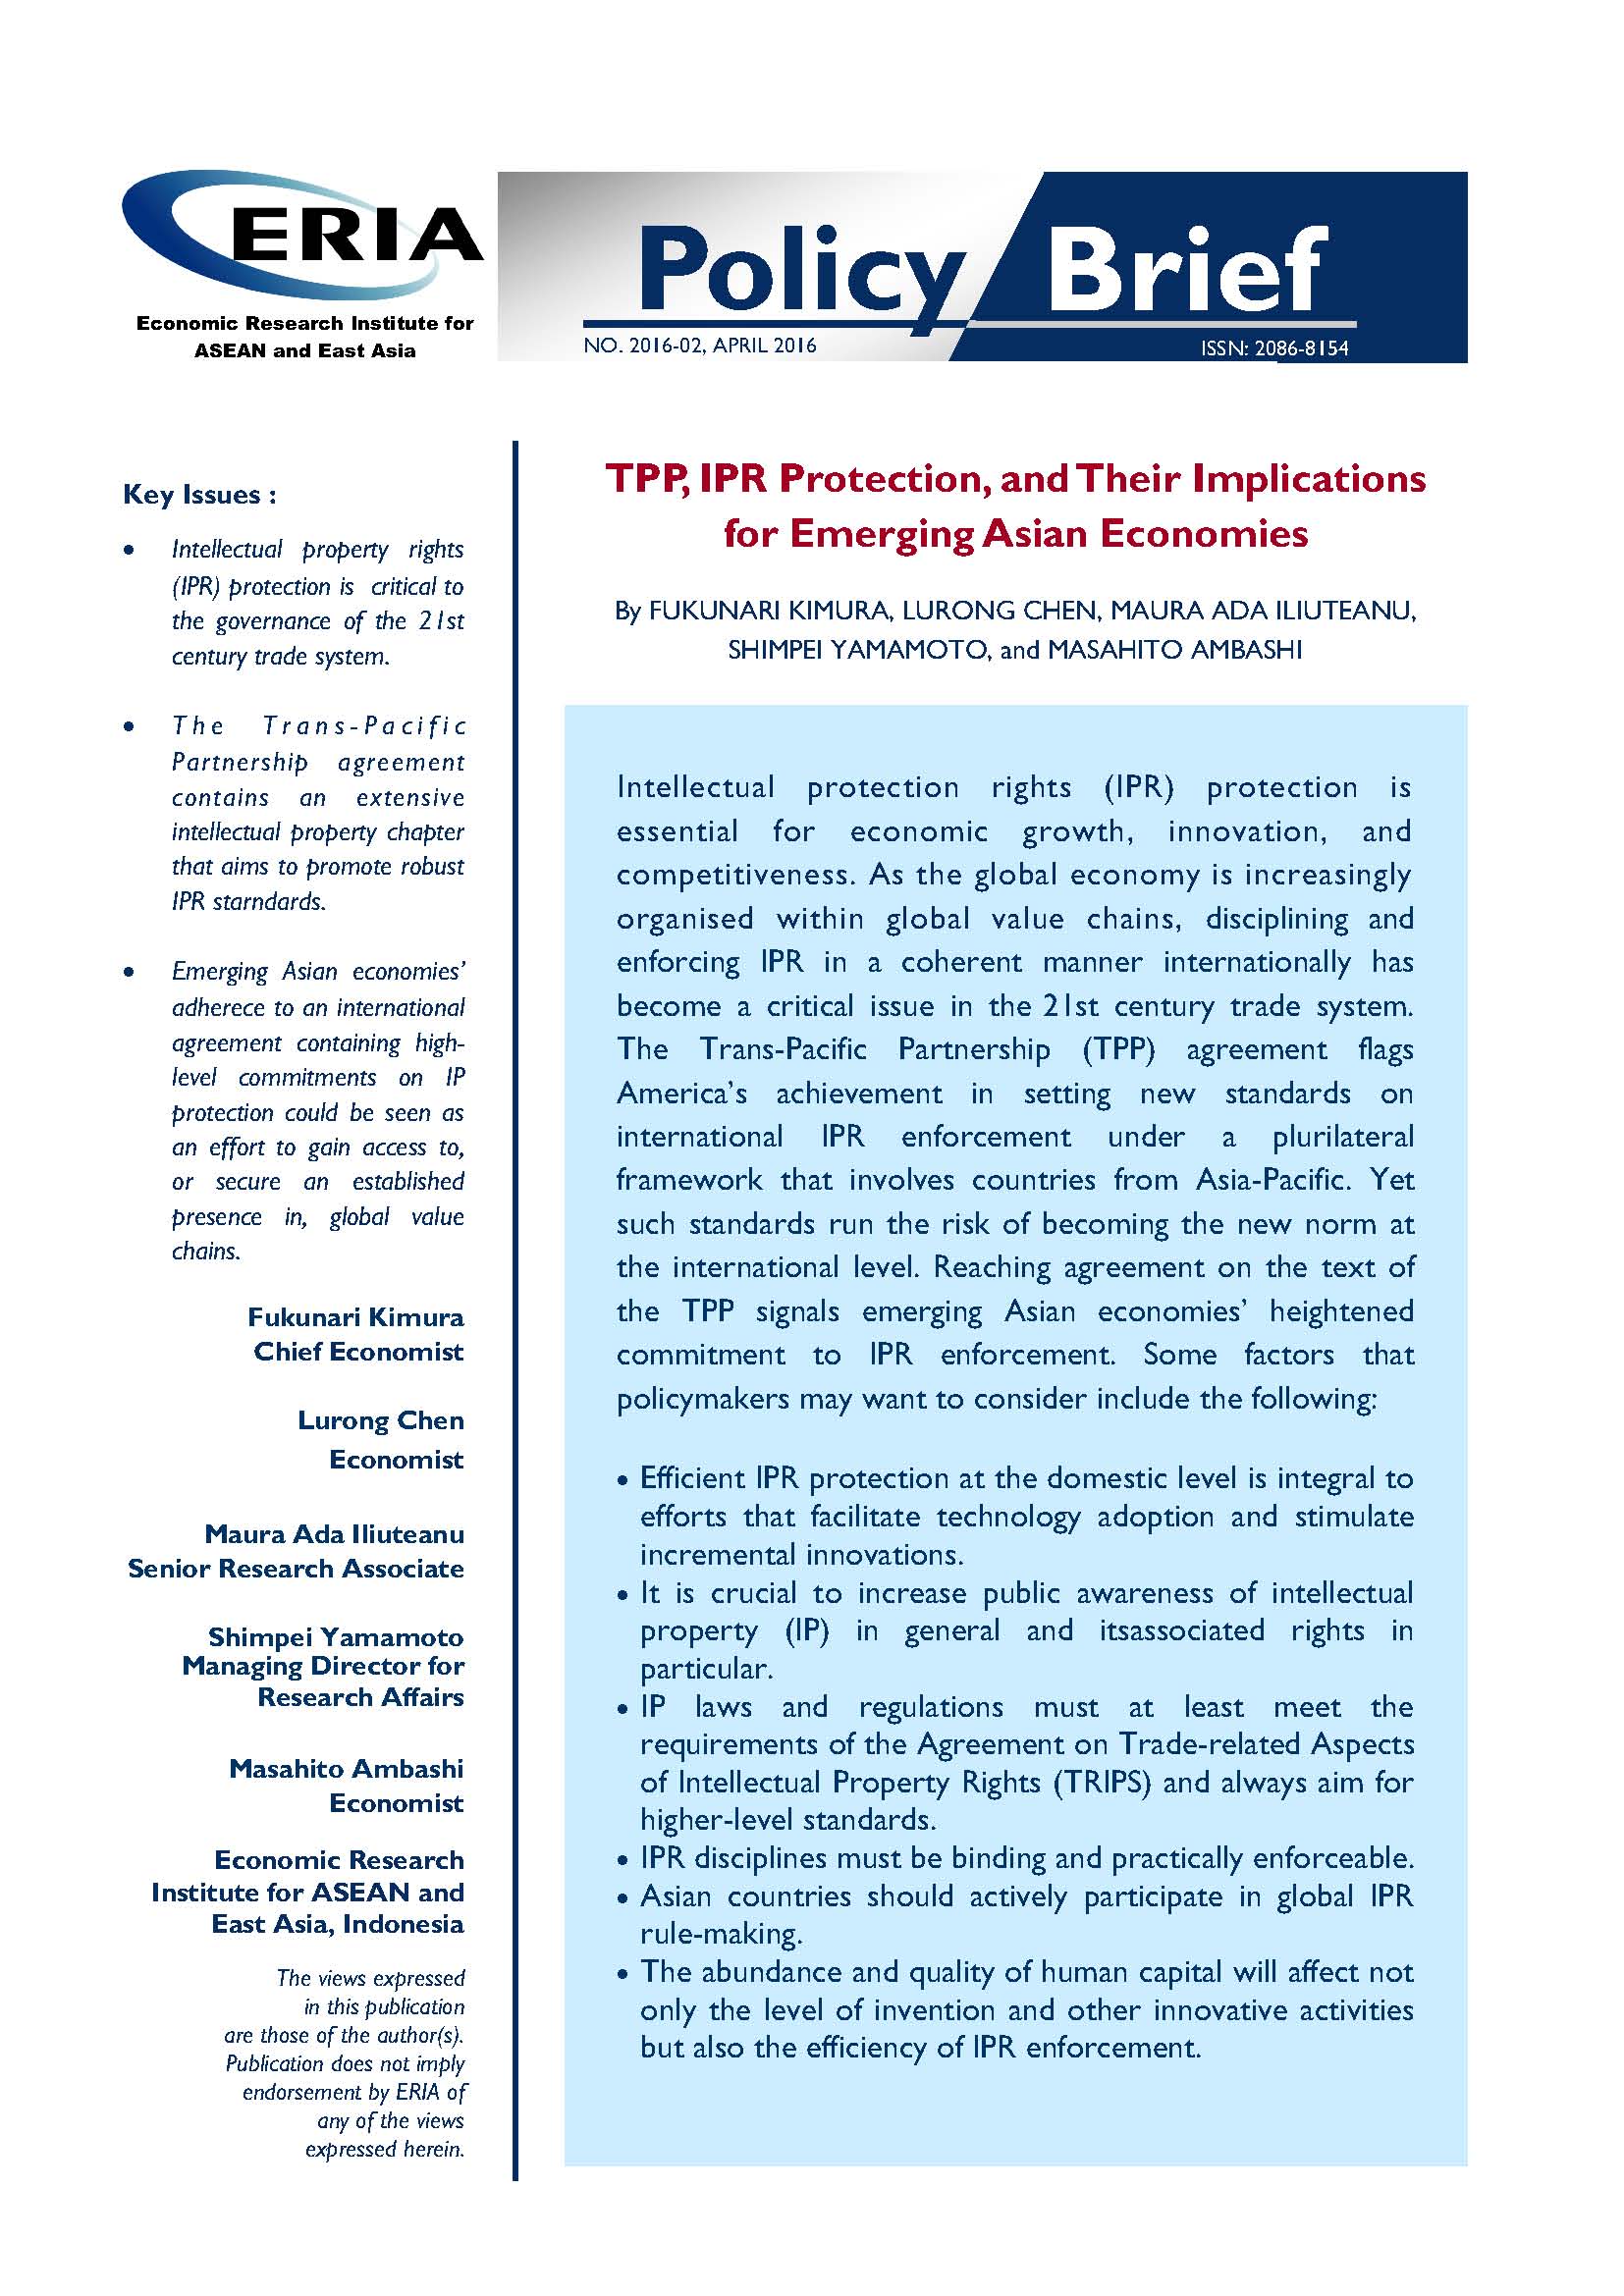 TPP, IPR Protection, and Their Implications for Emerging Asian Economies